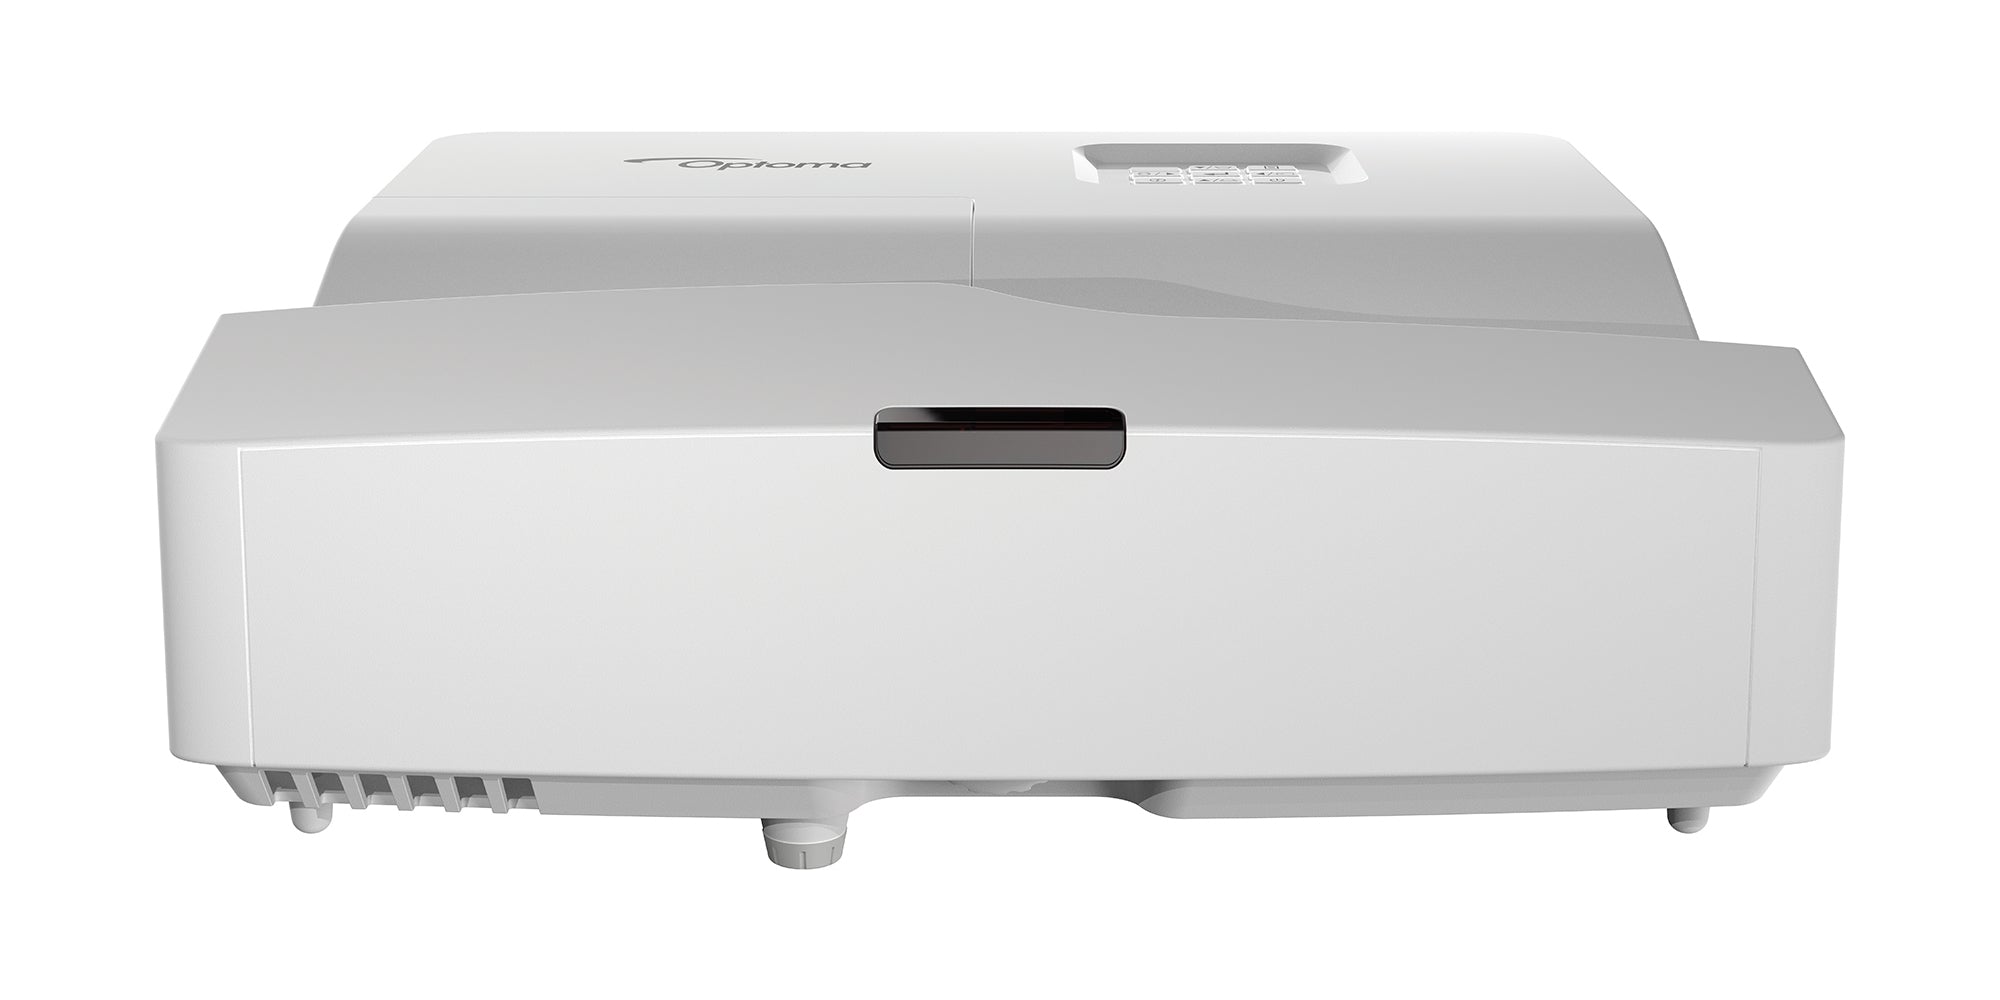 Optoma EH340UST data projector Ultra short throw projector 4000 ANSI lumens DLP 1080p (1920x1080) 3D White